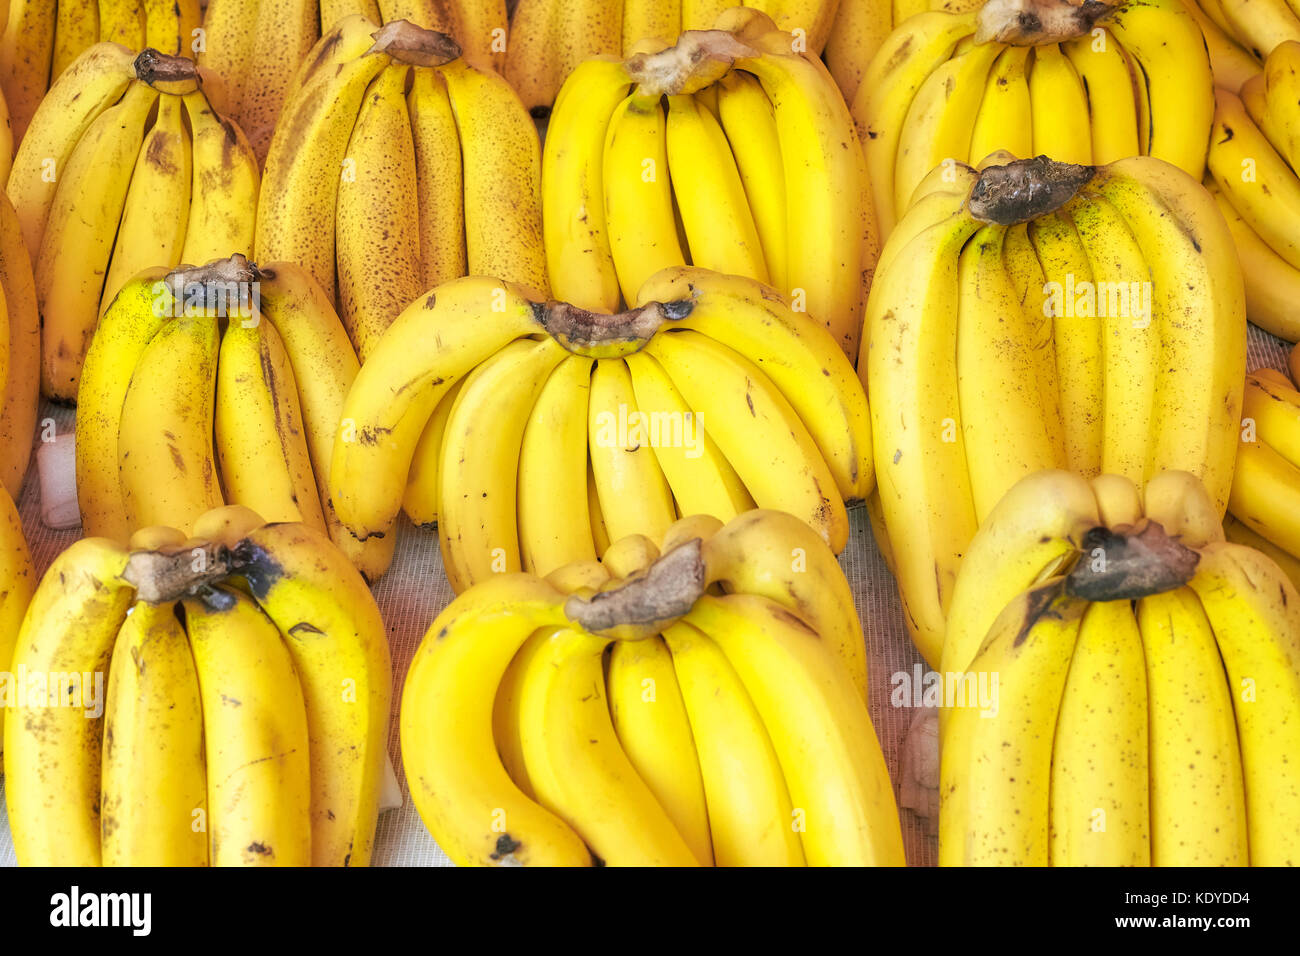 Bunch of Bananas on Red Background. Fresh Organic Banana, Fresh Bananas on  Kitchen Table Stock Image - Image of bkack, container: 62492349